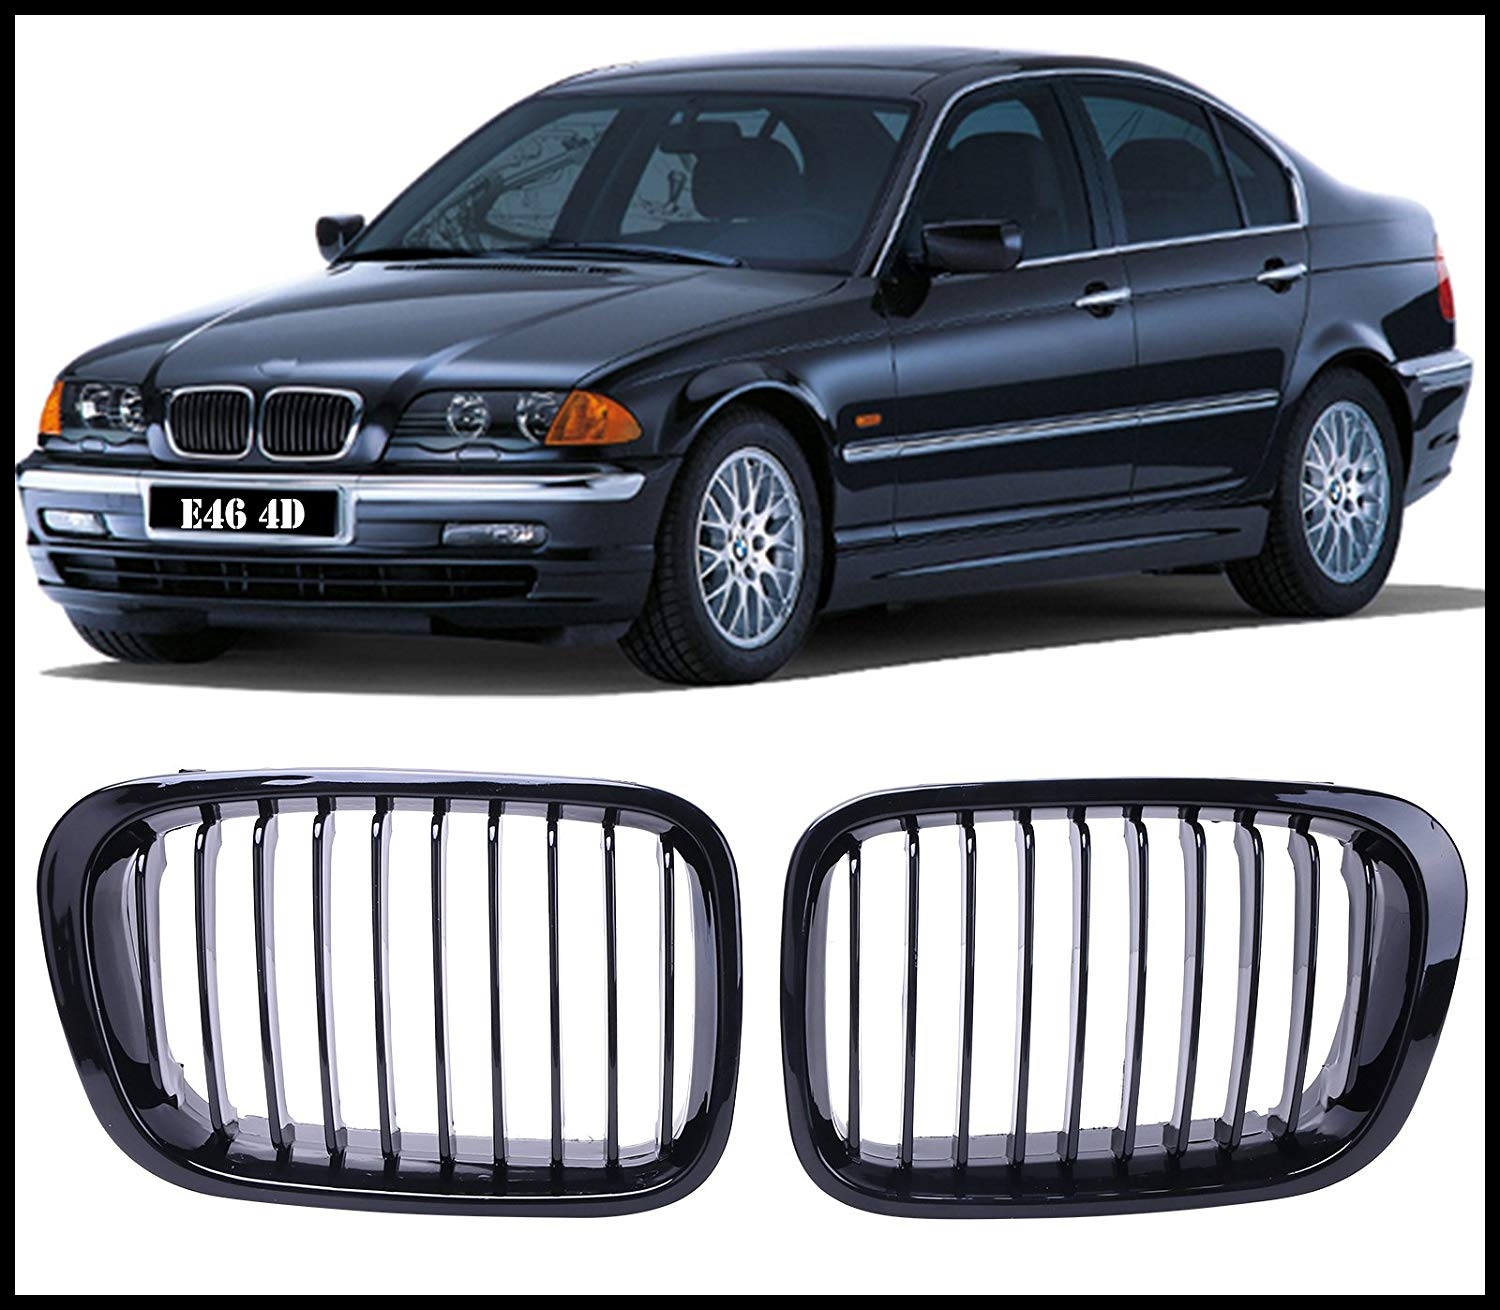 Front Grill Grille Hood Nose For E46 Sedan 4DR 1998 2001 Amazon Car & Motorbike